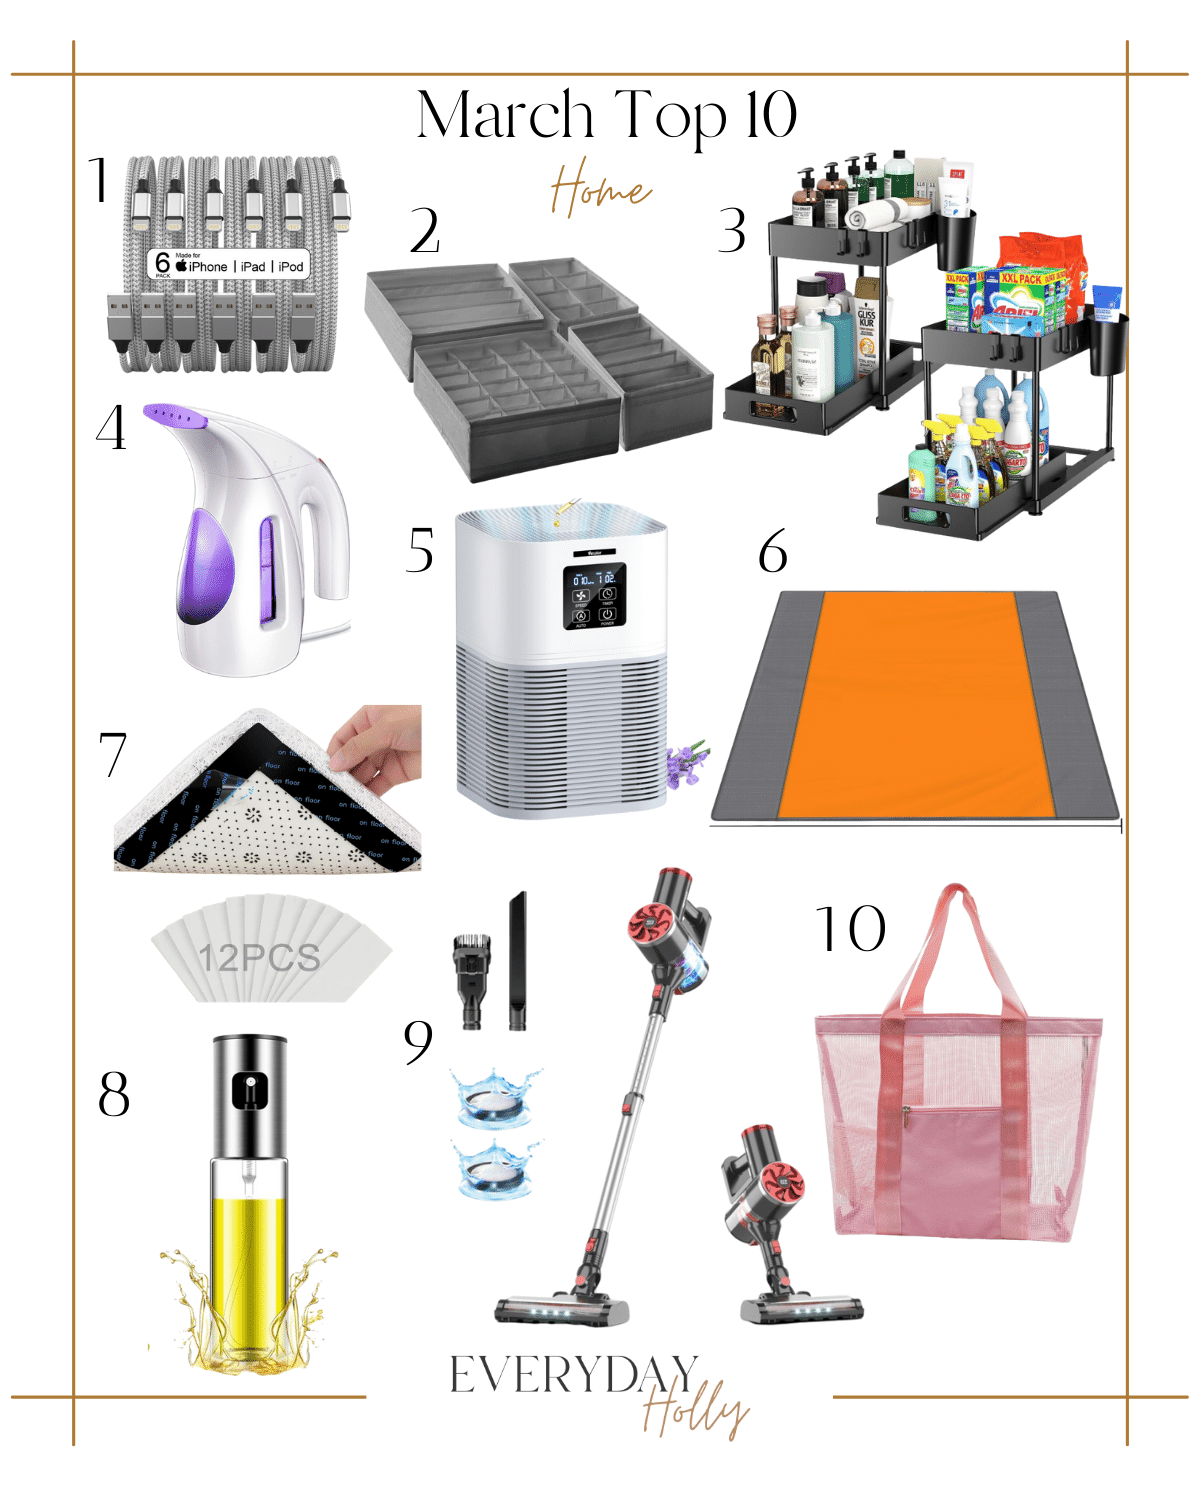 march top 10, march best sellers, organizers, home favorites, beach essentials, home essentials, home hacks, amazon home finds, 